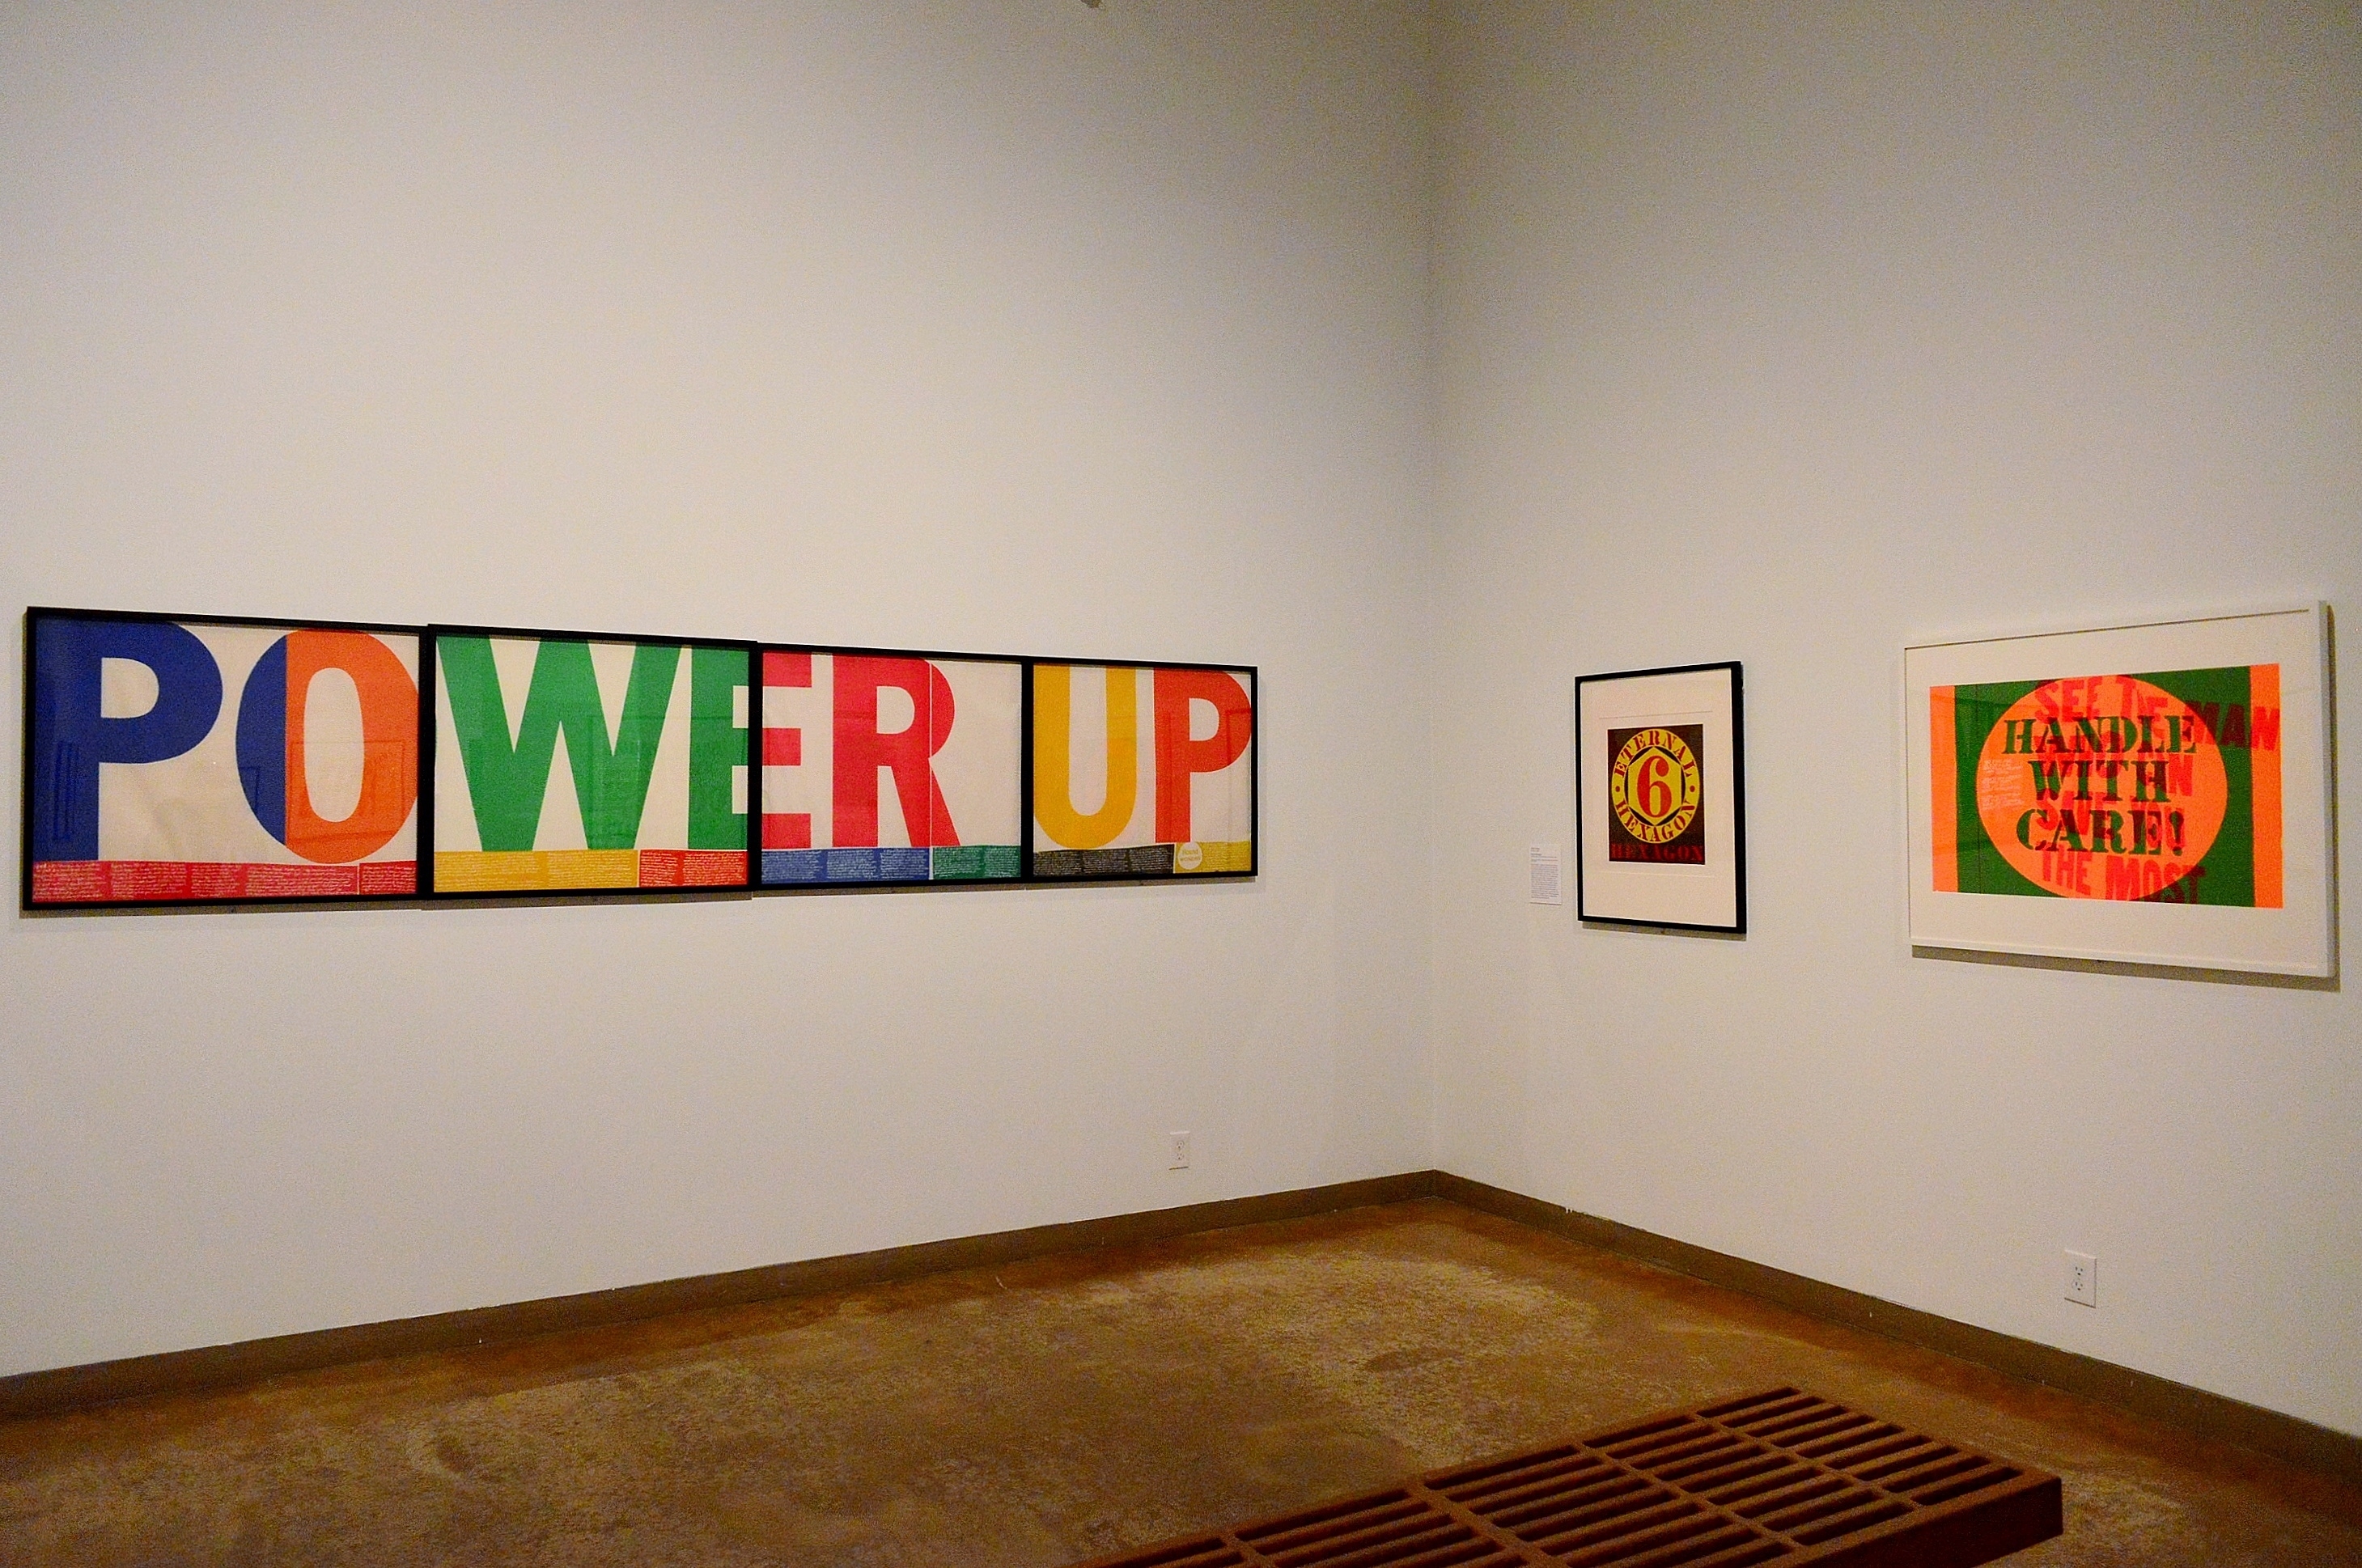 External Hexagon by Robert Indiana (c) flanked by two Corita Kent works power up (r) and handle with care (l).